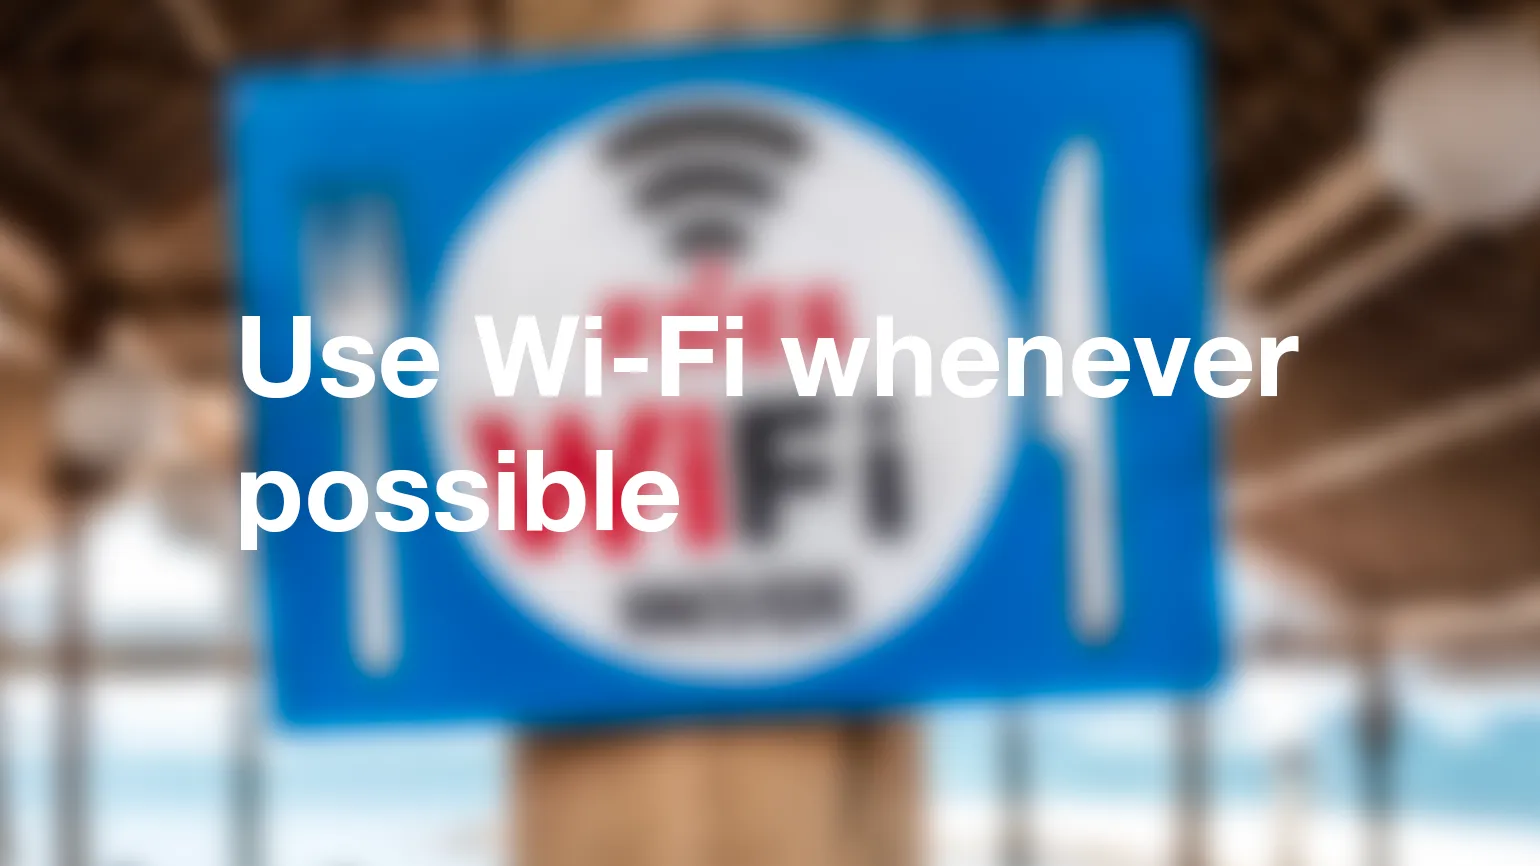 Use Wi-Fi whenever possible